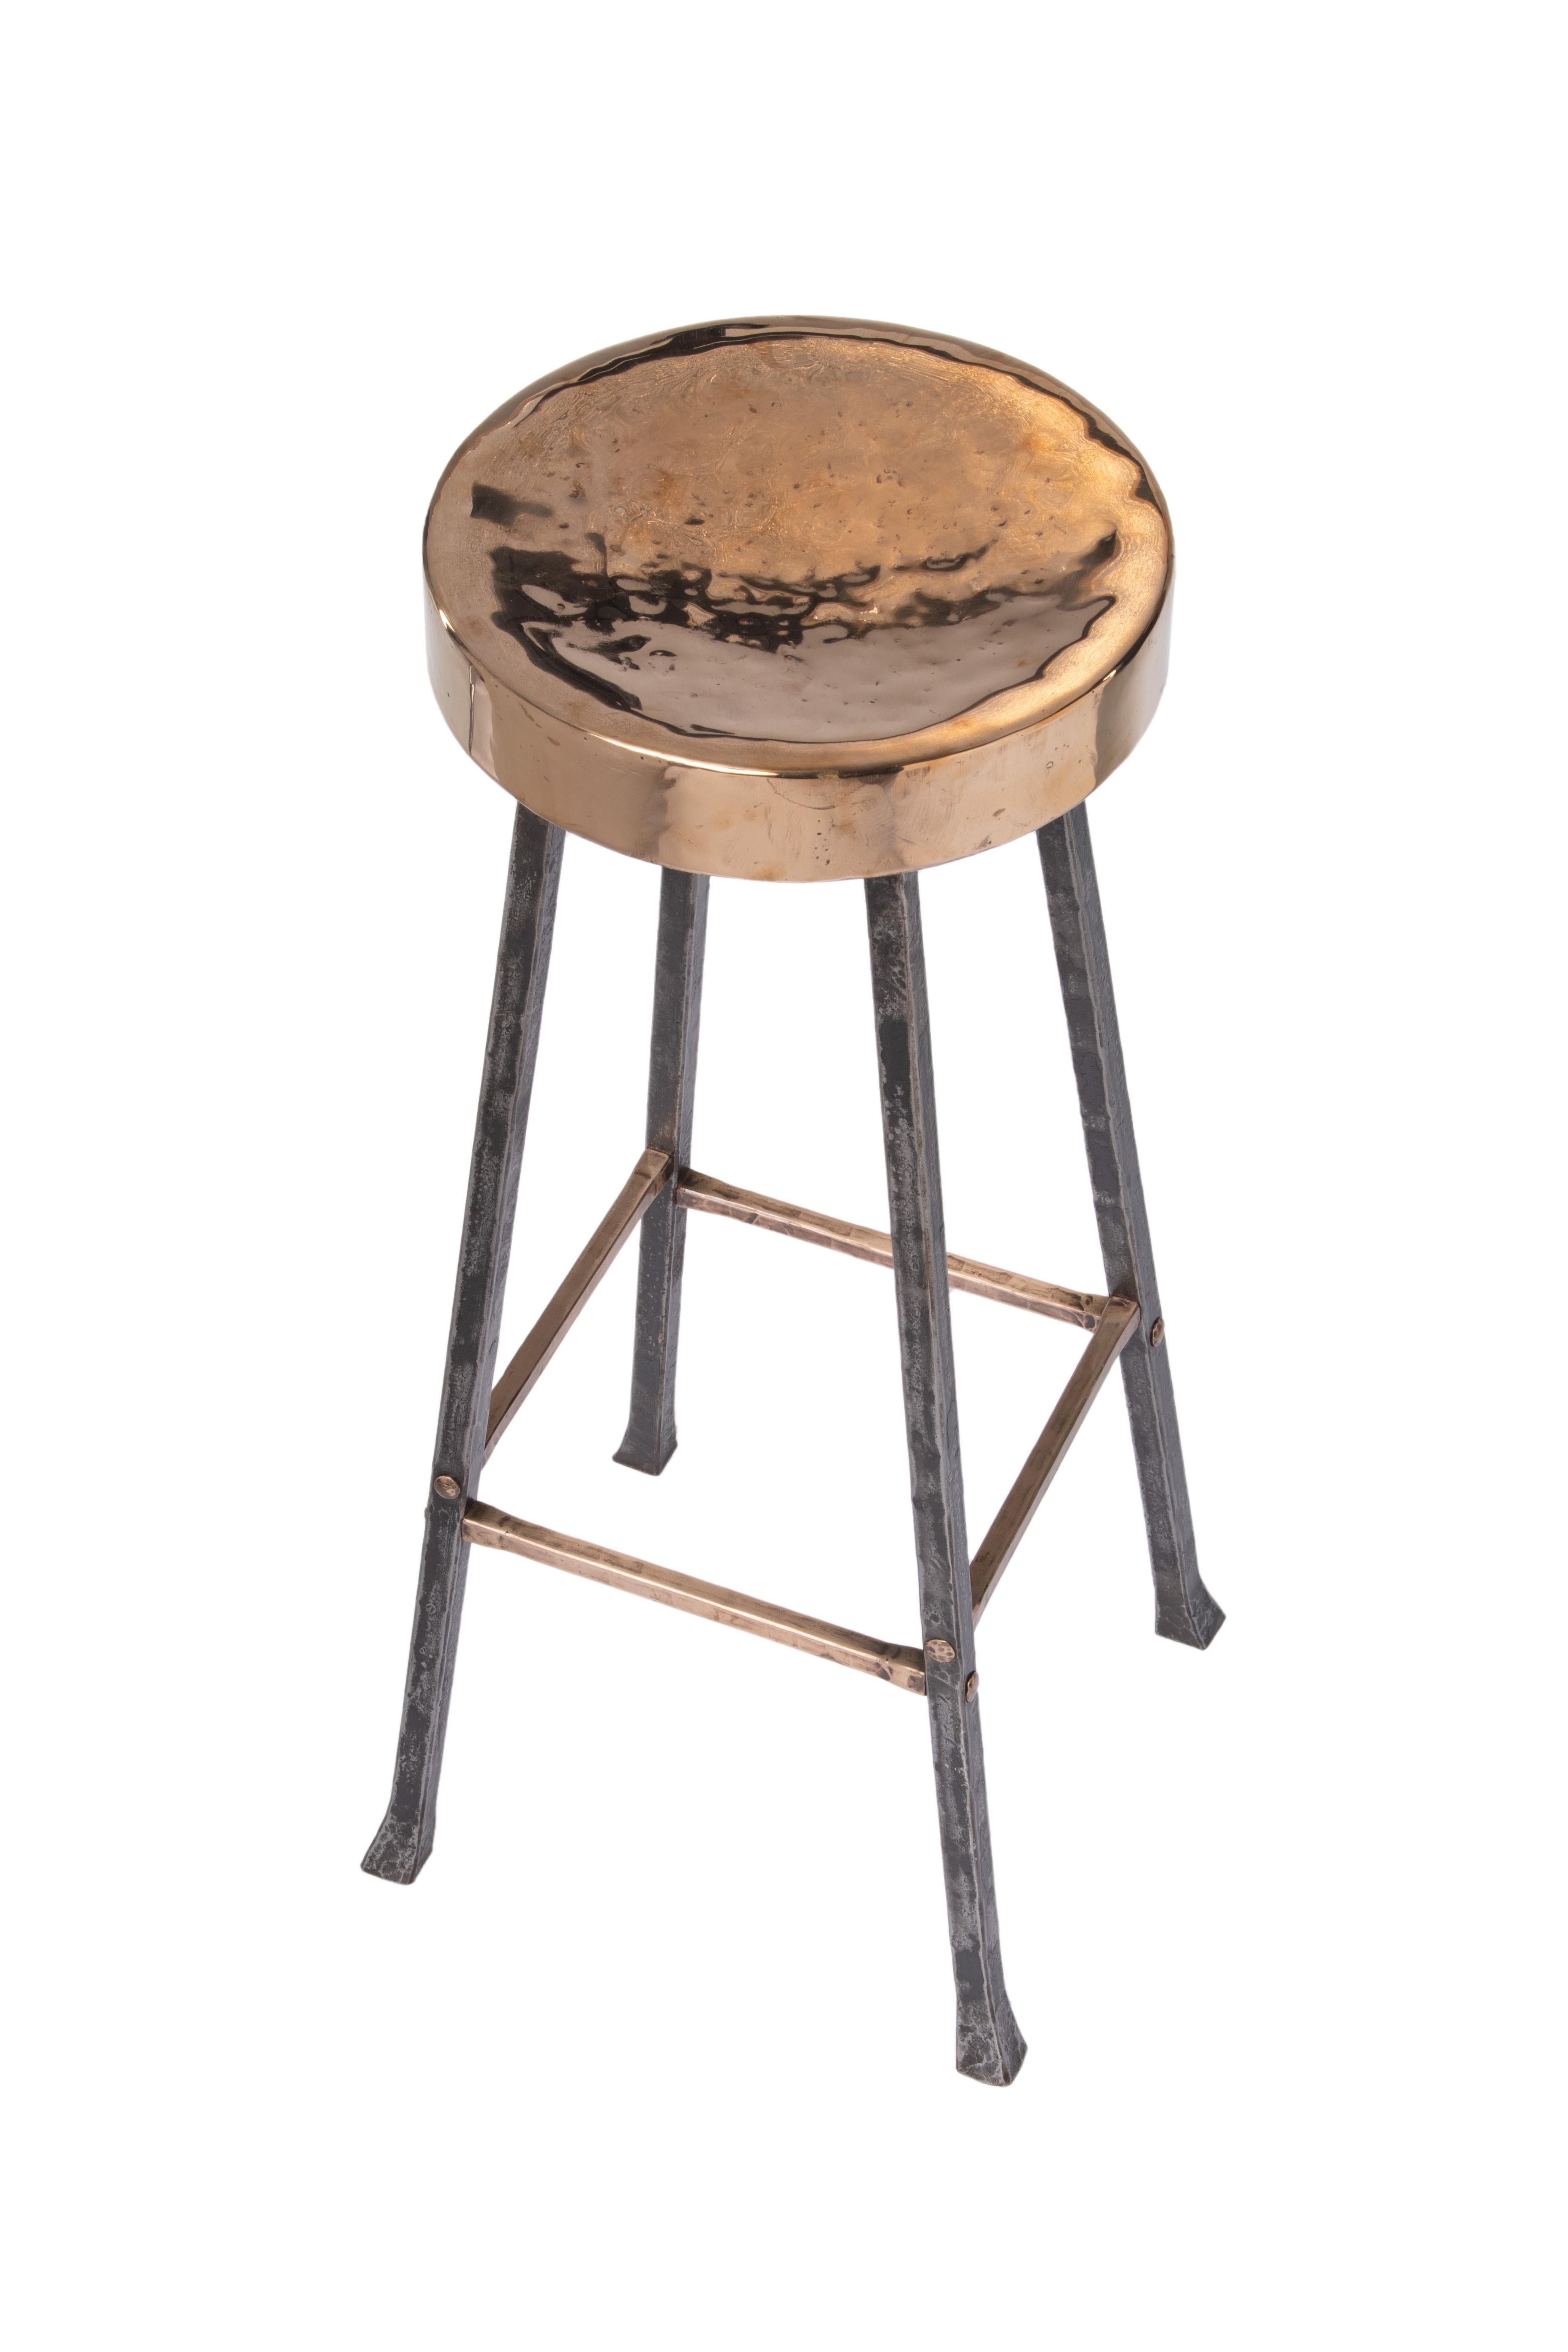 This bronze and steel stool is designed to be paired with a bar. The smooth bronze seat is made from a single piece of bronze surrounding a wood core. The steel legs are forged using traditional joinery techniques and hammered details provide